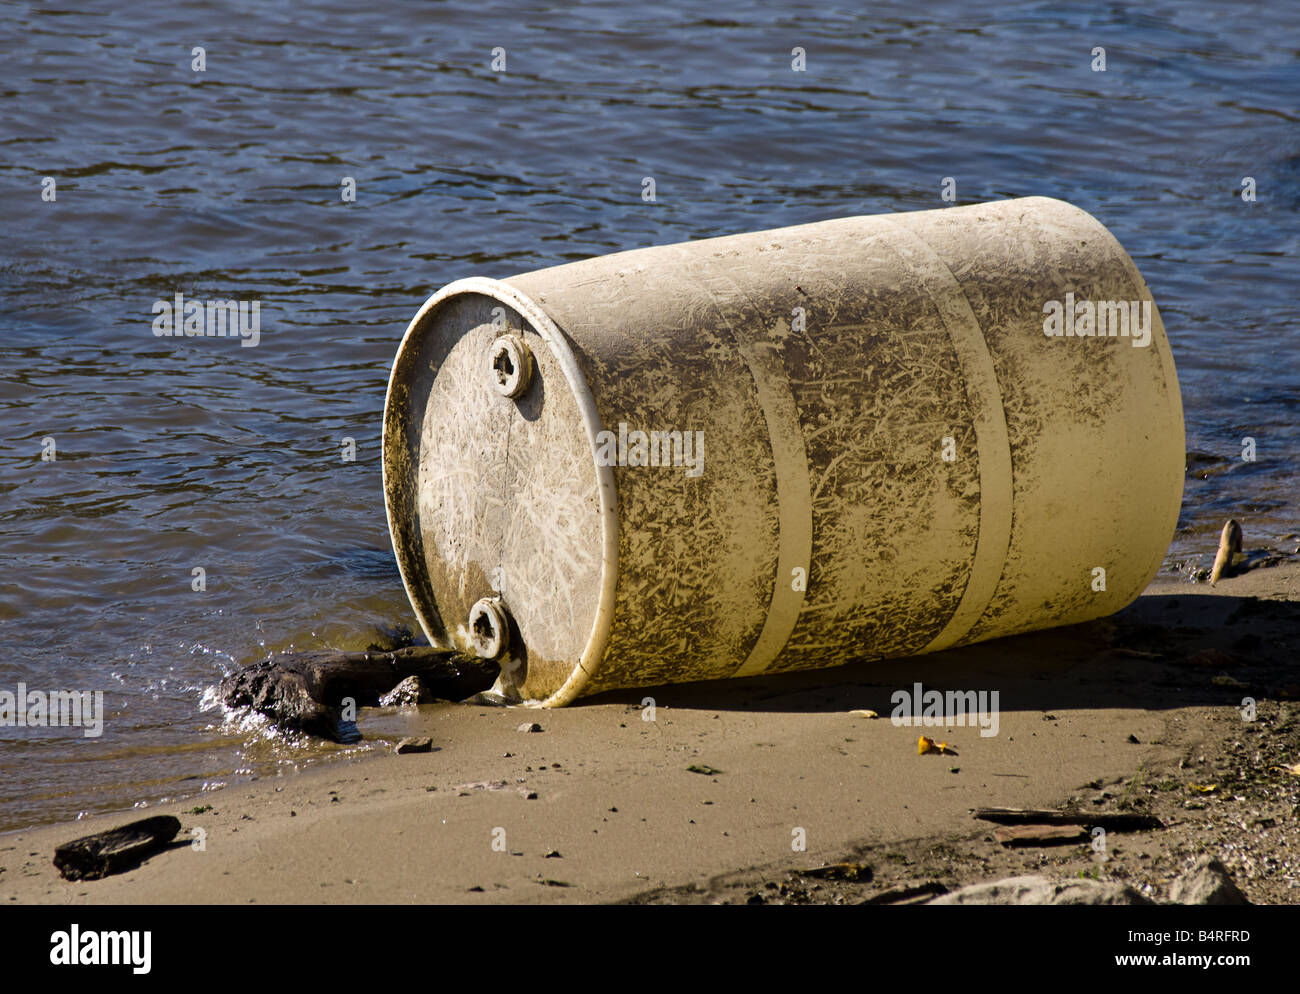 A plastic barrel that has washed up on the shores of the Mississippi river. Stock Photo